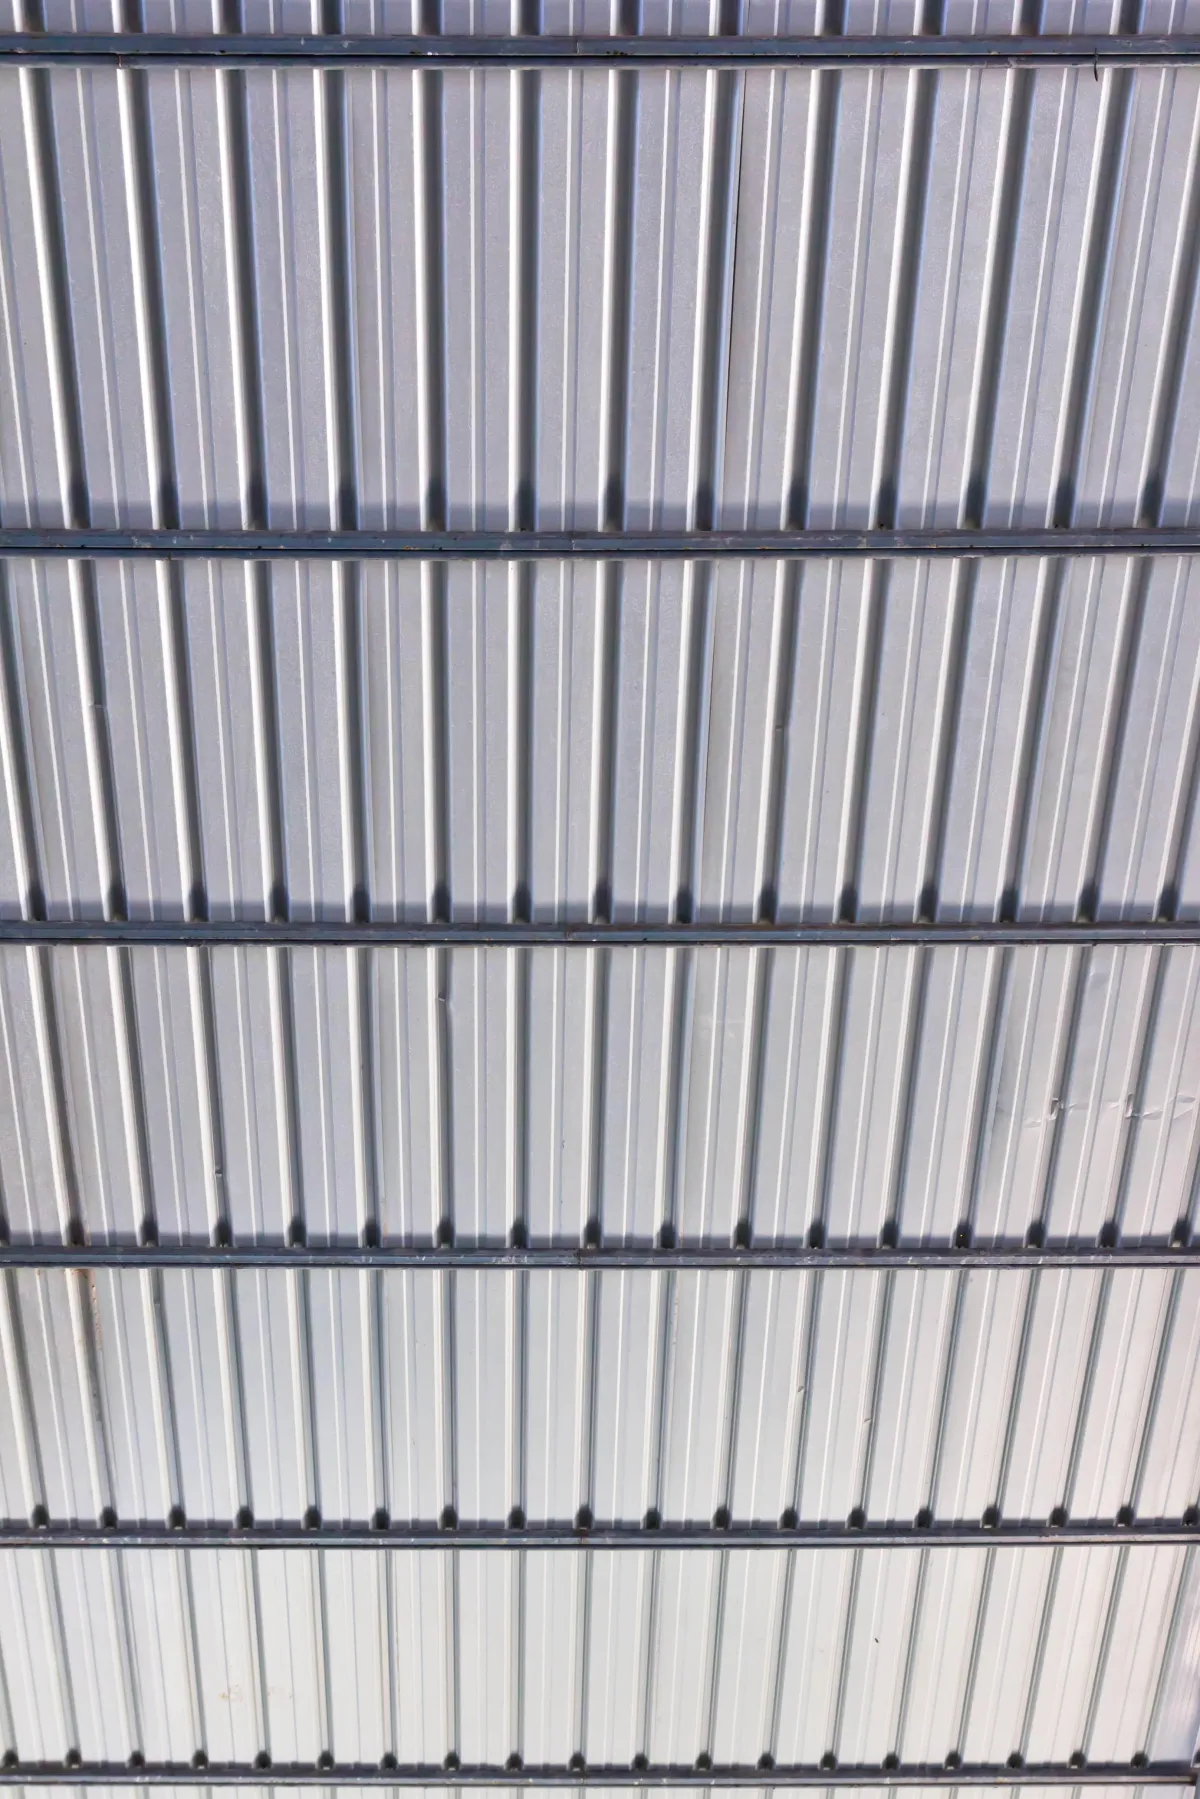 roofing, standing seam metal roofing